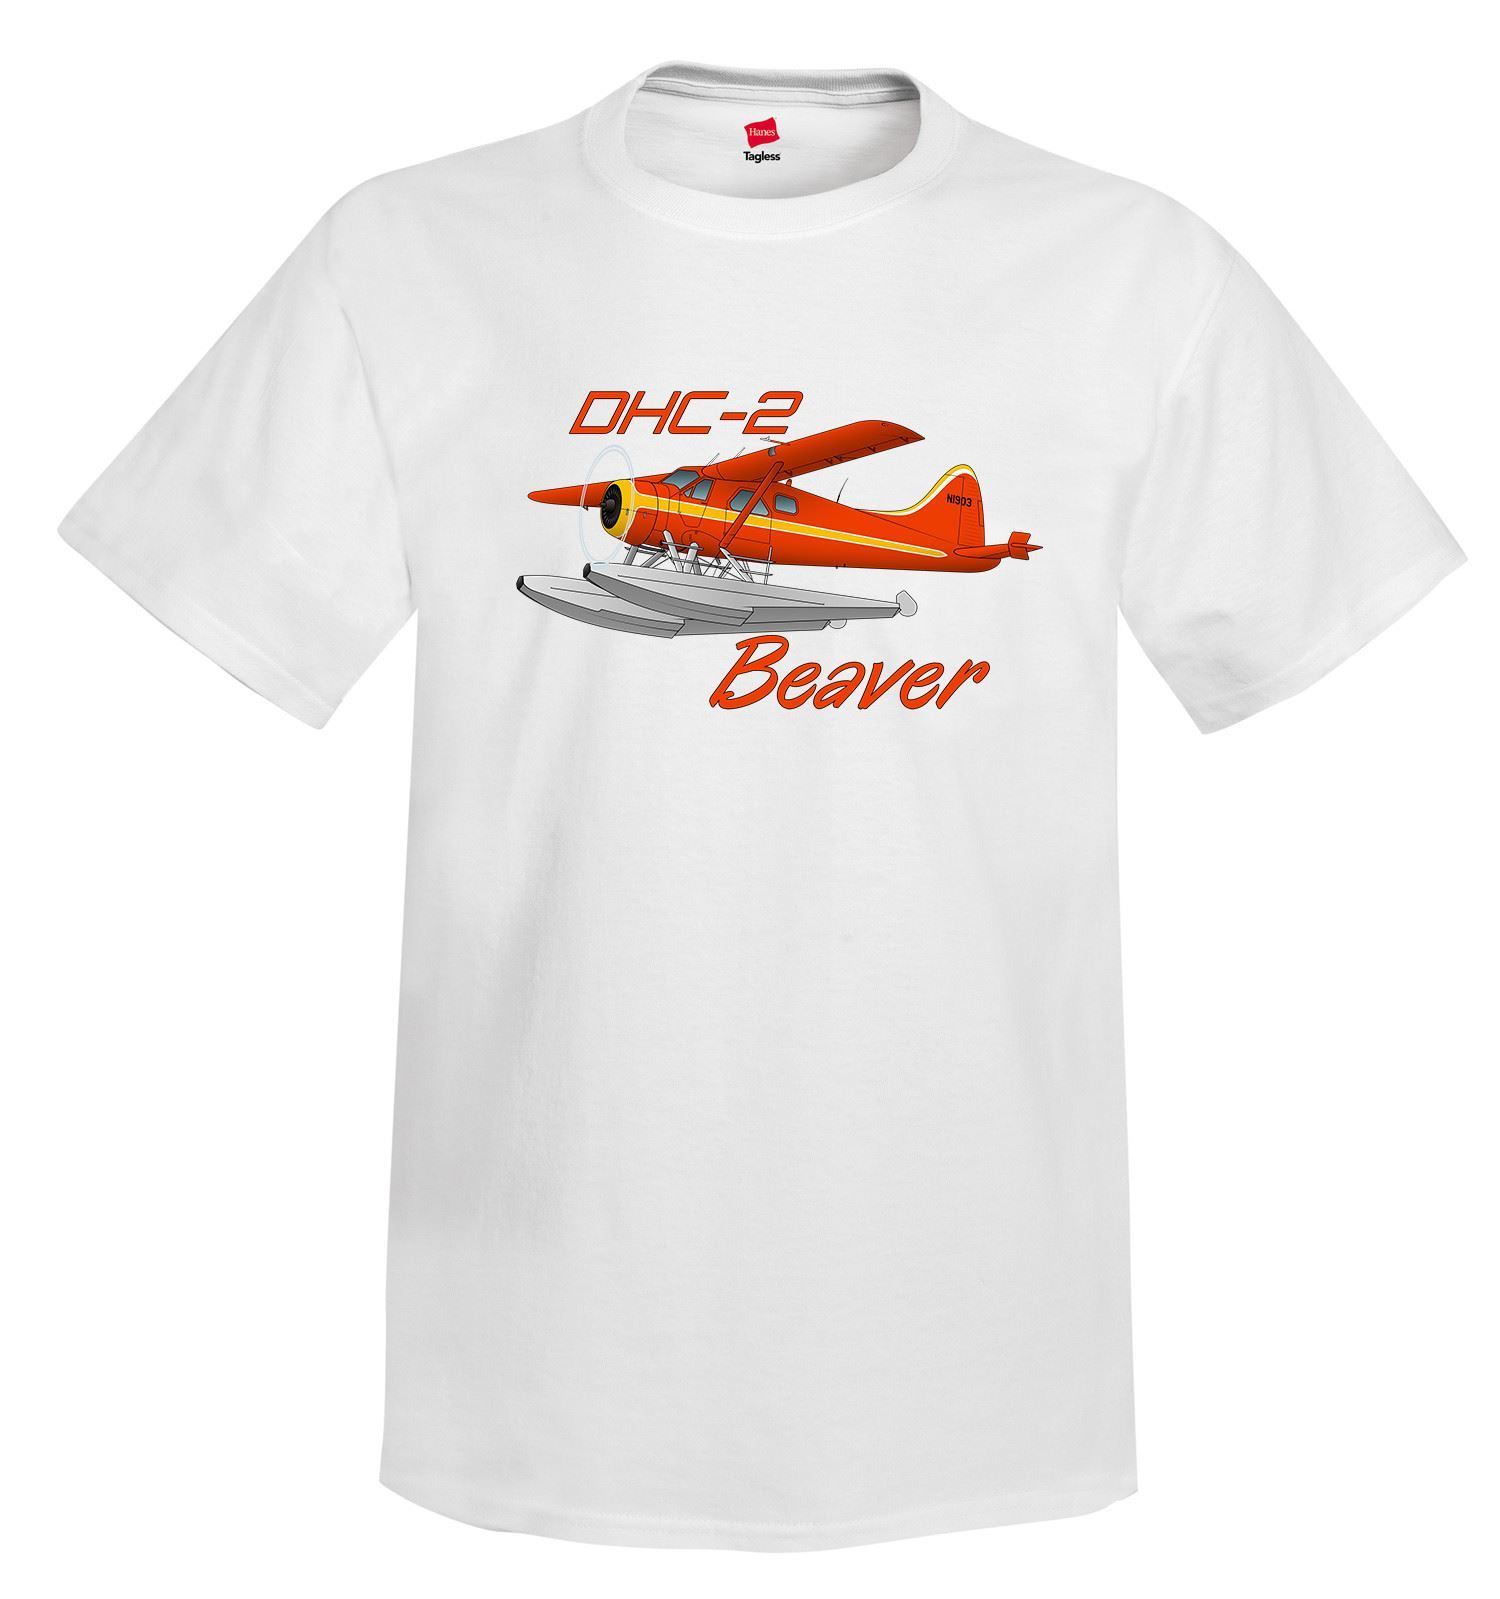 Hip Hop Novelty T Shirts Men'S Brand Clothing De Havilland DHC-2 Beaver Airplane T-Shirt - Personalized with Your Tee Shirt